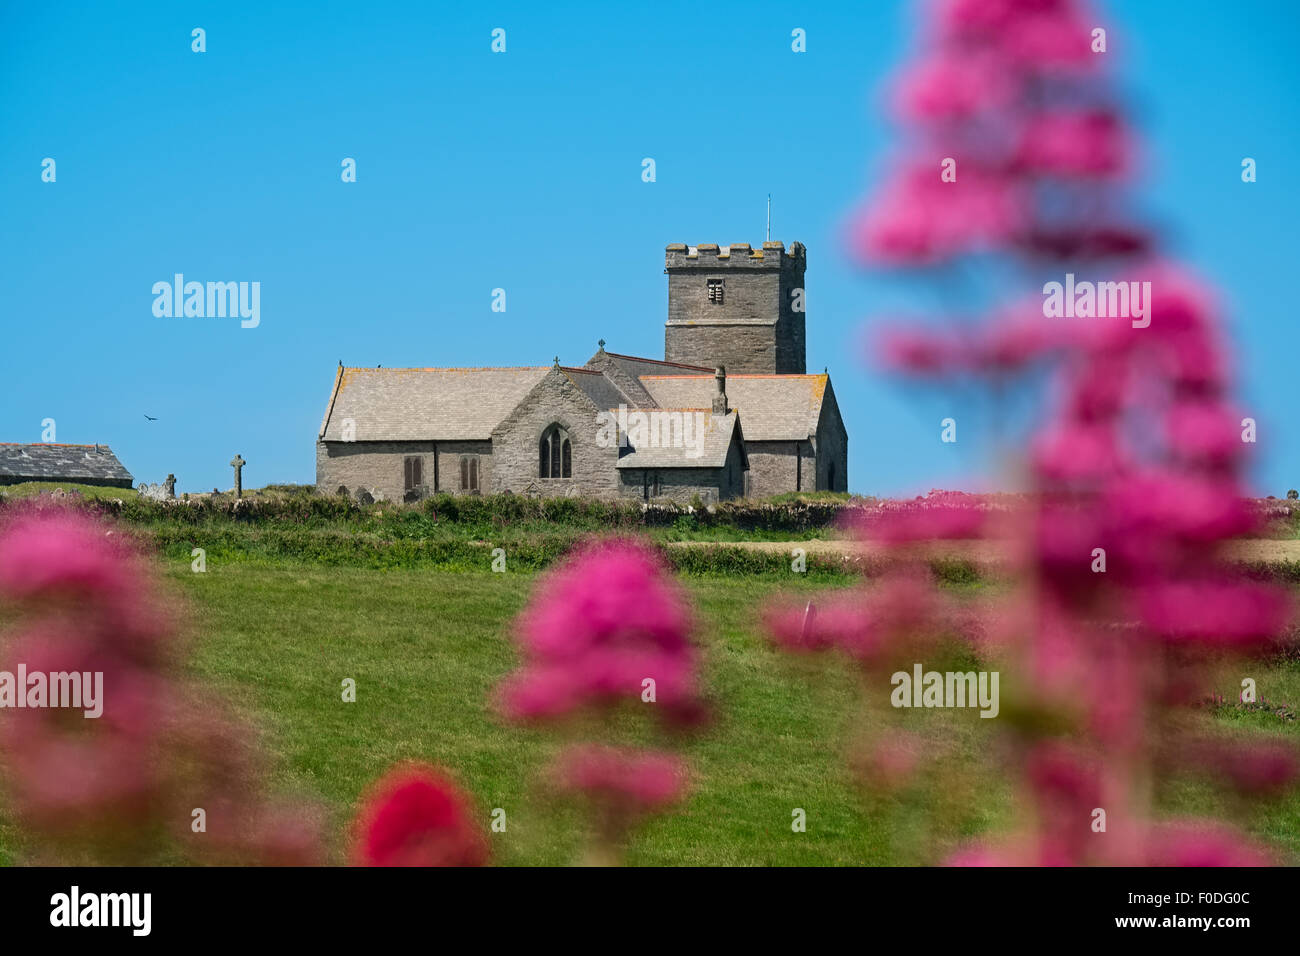 Pink valerian flowers in front of the parish Church of Saint Materiana at Tintagel, Cornwall, England, UK Stock Photo